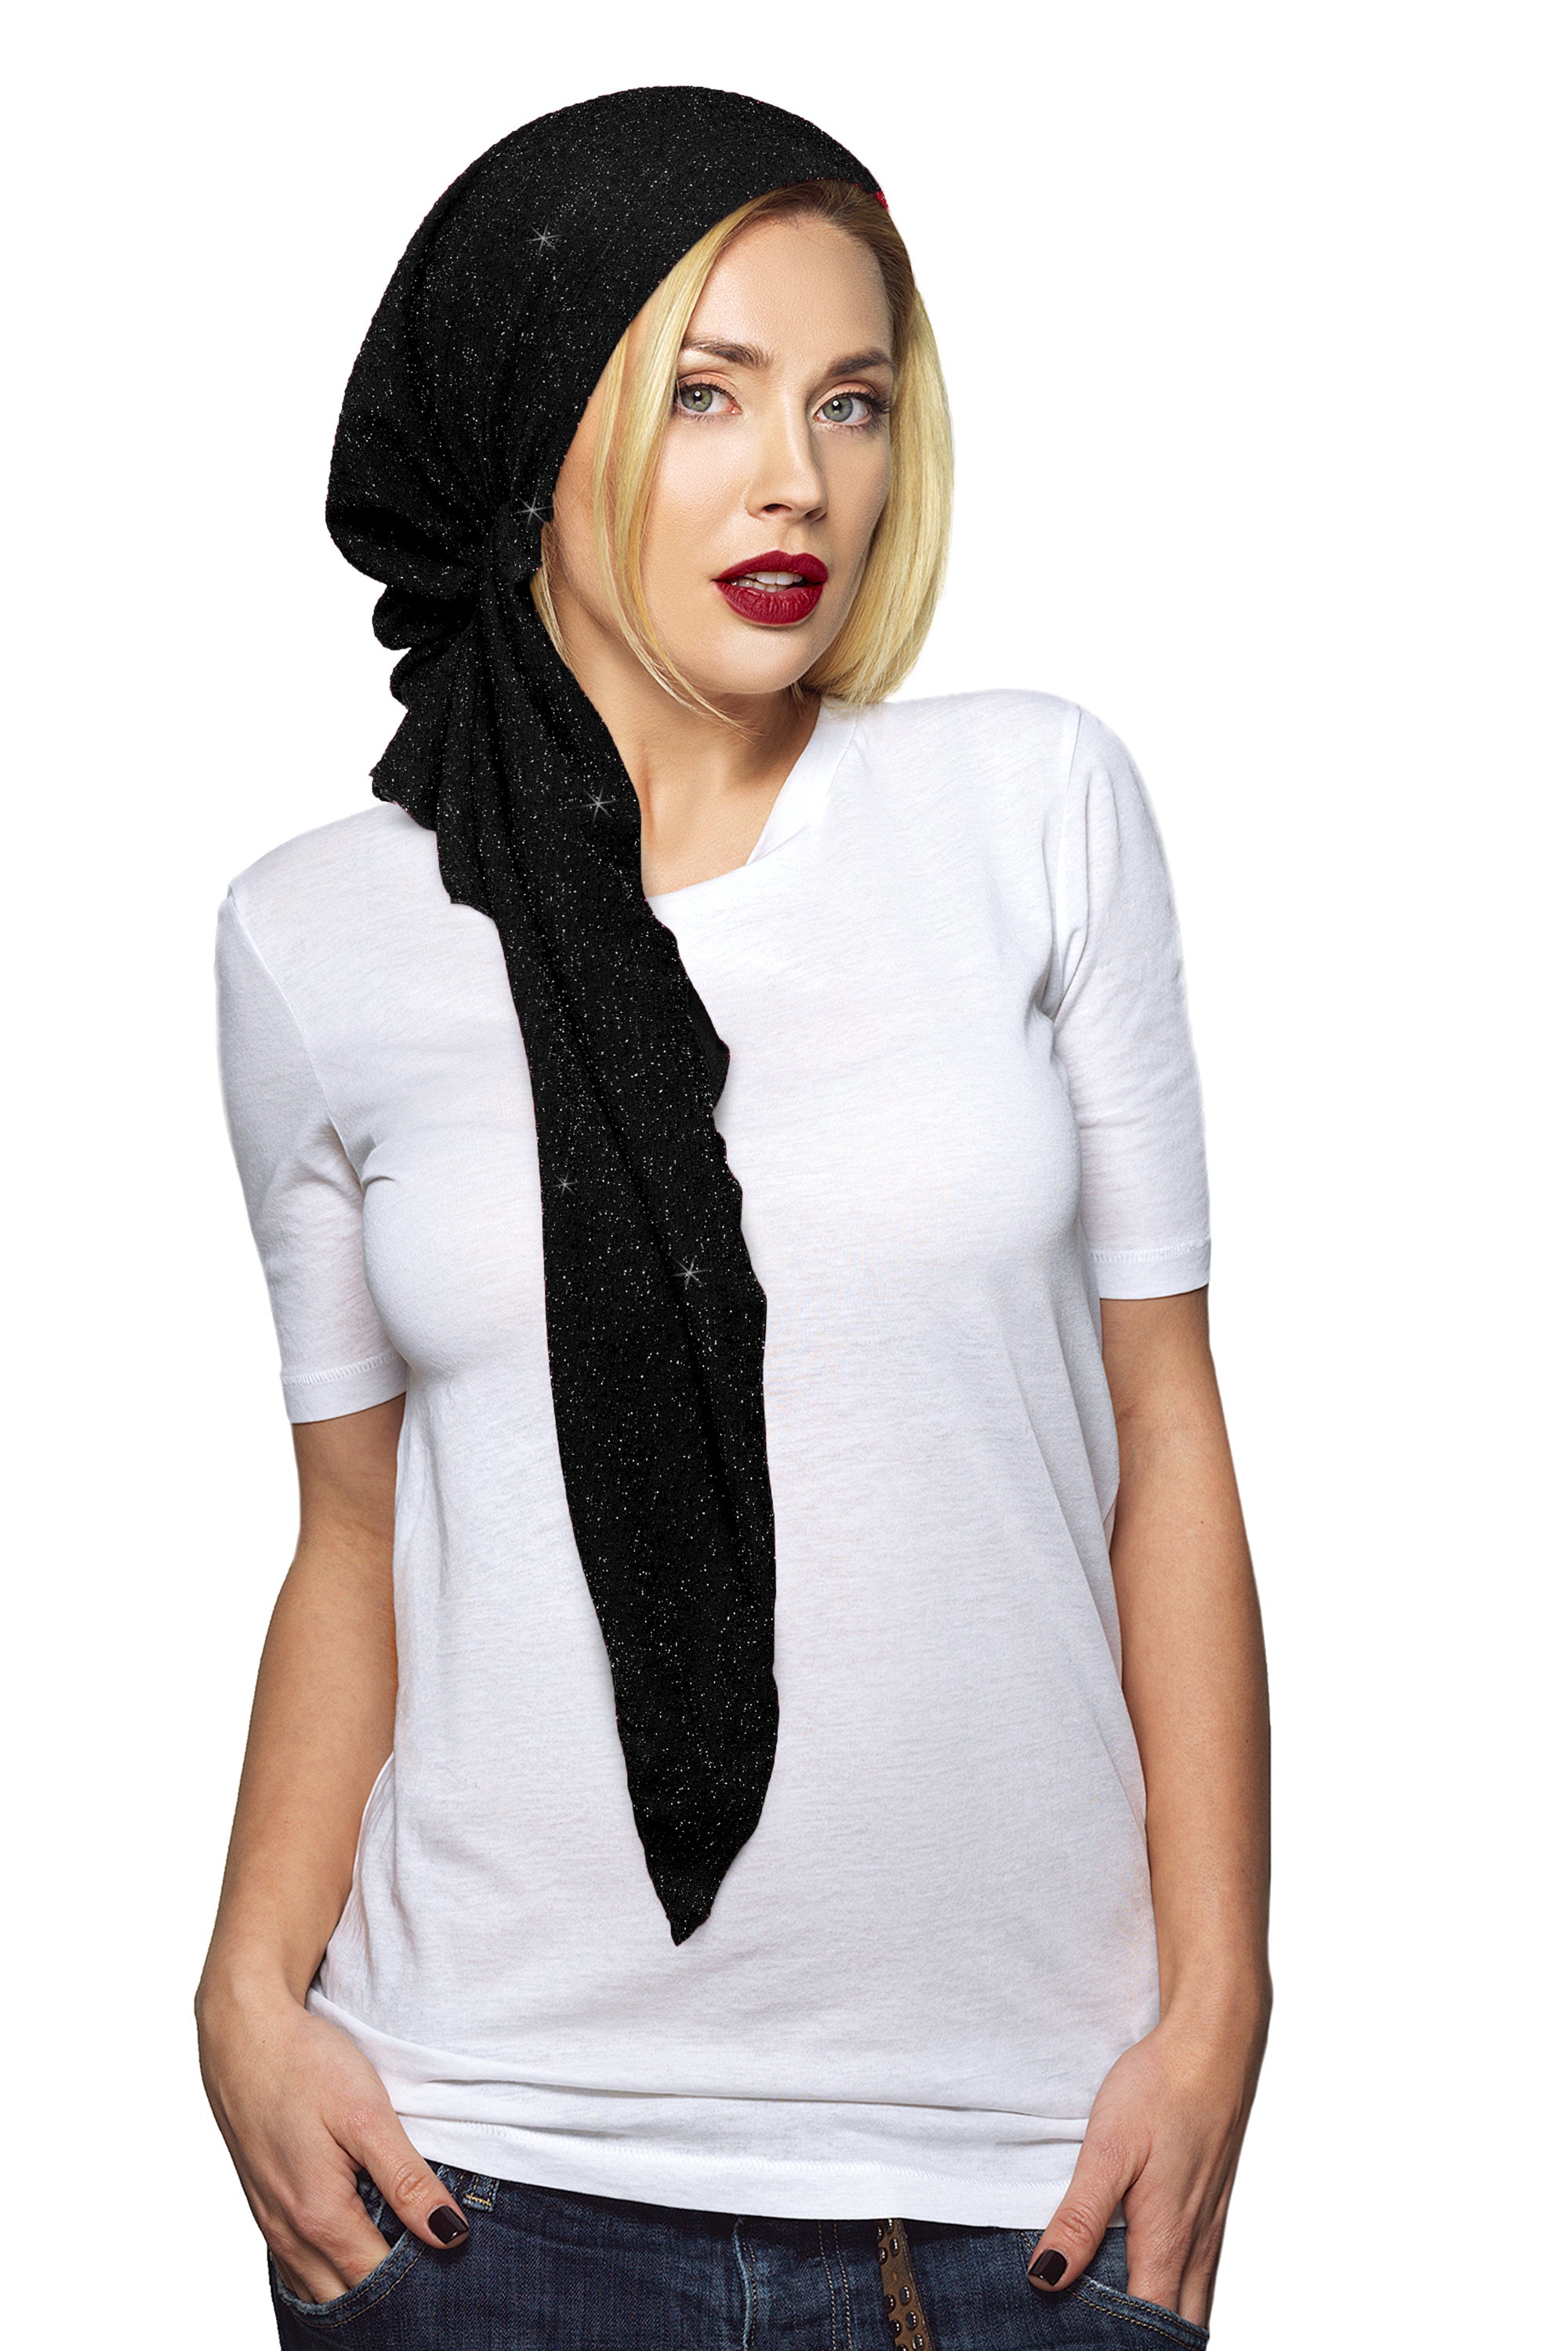 Long black headscarf with sparkles